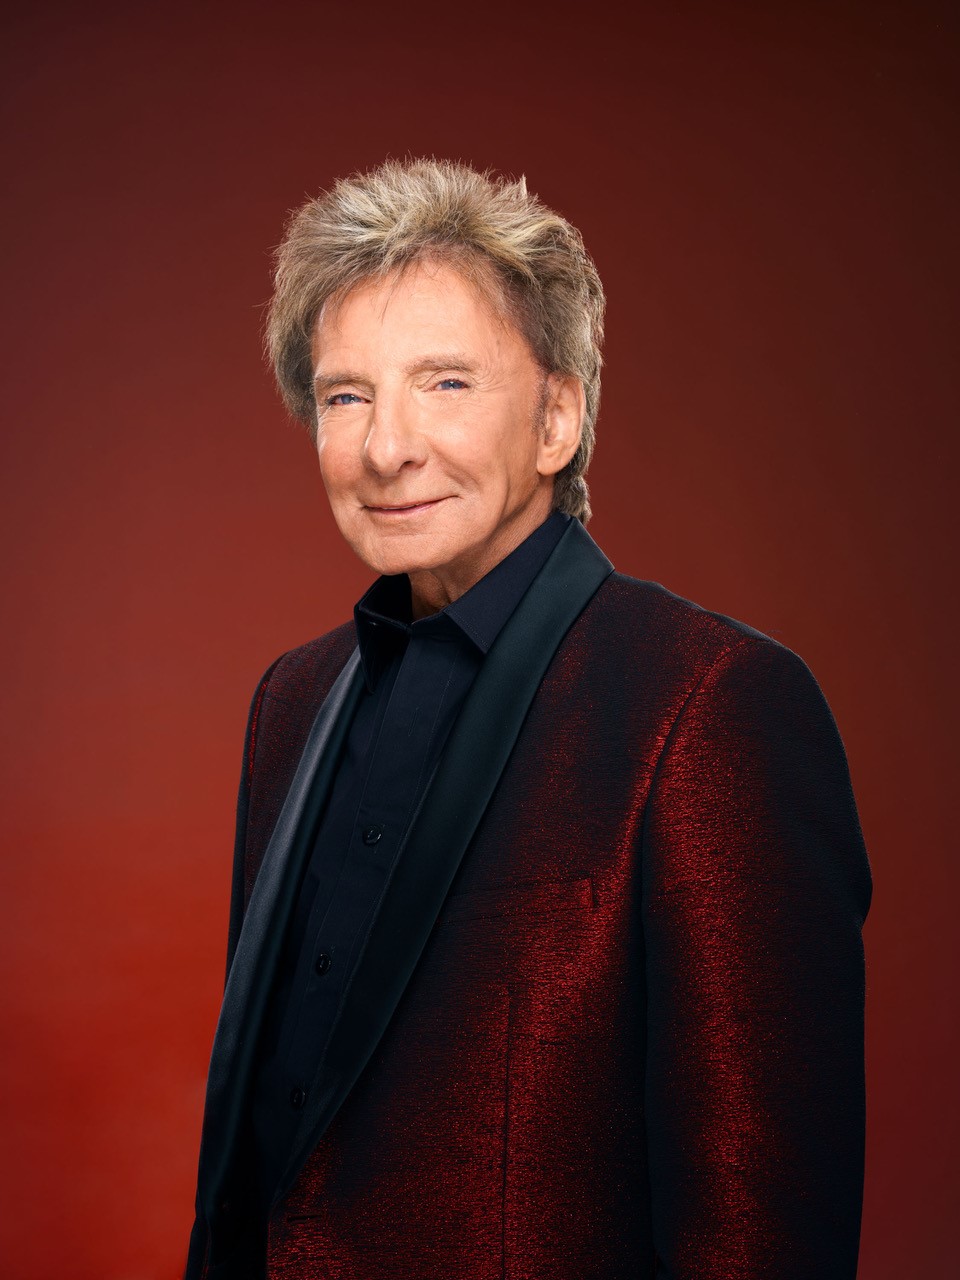 NBC CELEBRATES THE WINTER HOLIDAYS WITH MUSIC LEGEND ‘BARRY MANILOW’S A